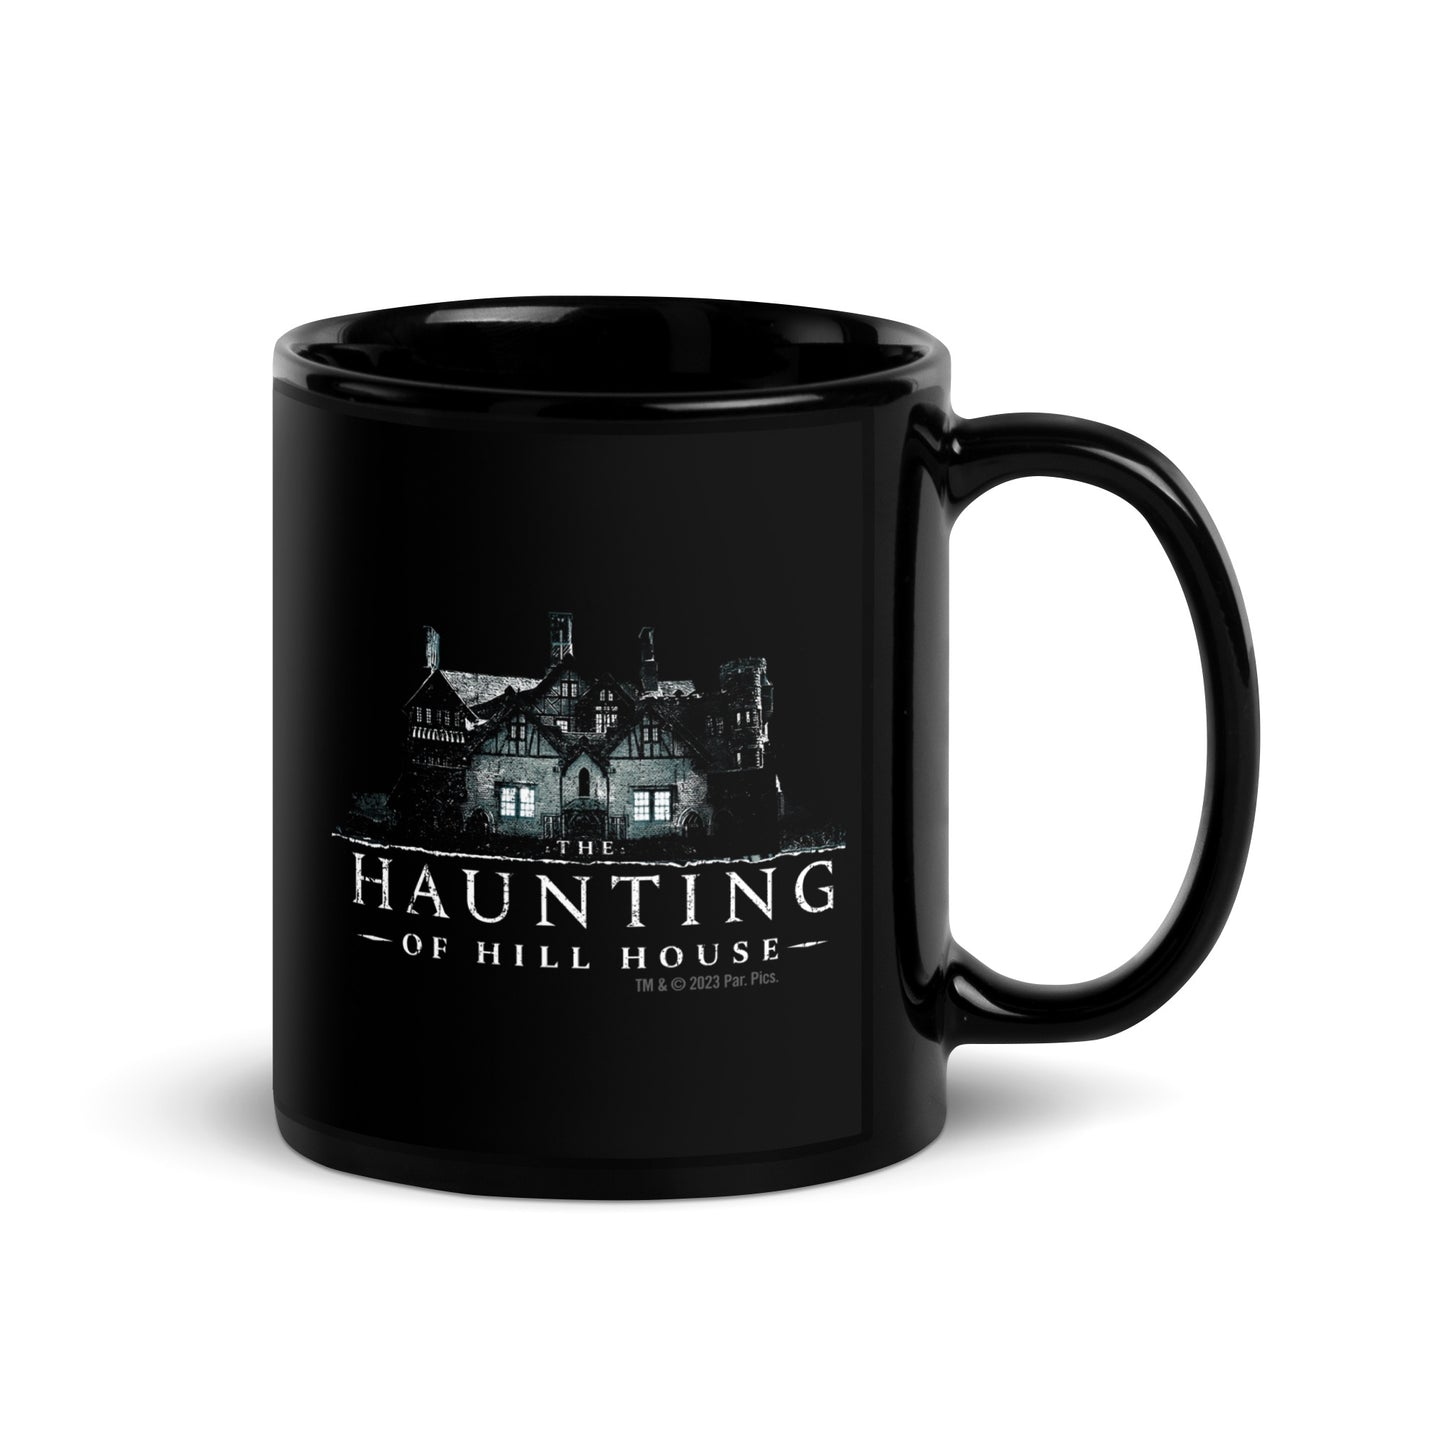 Tasse noire Haunting of Hill House